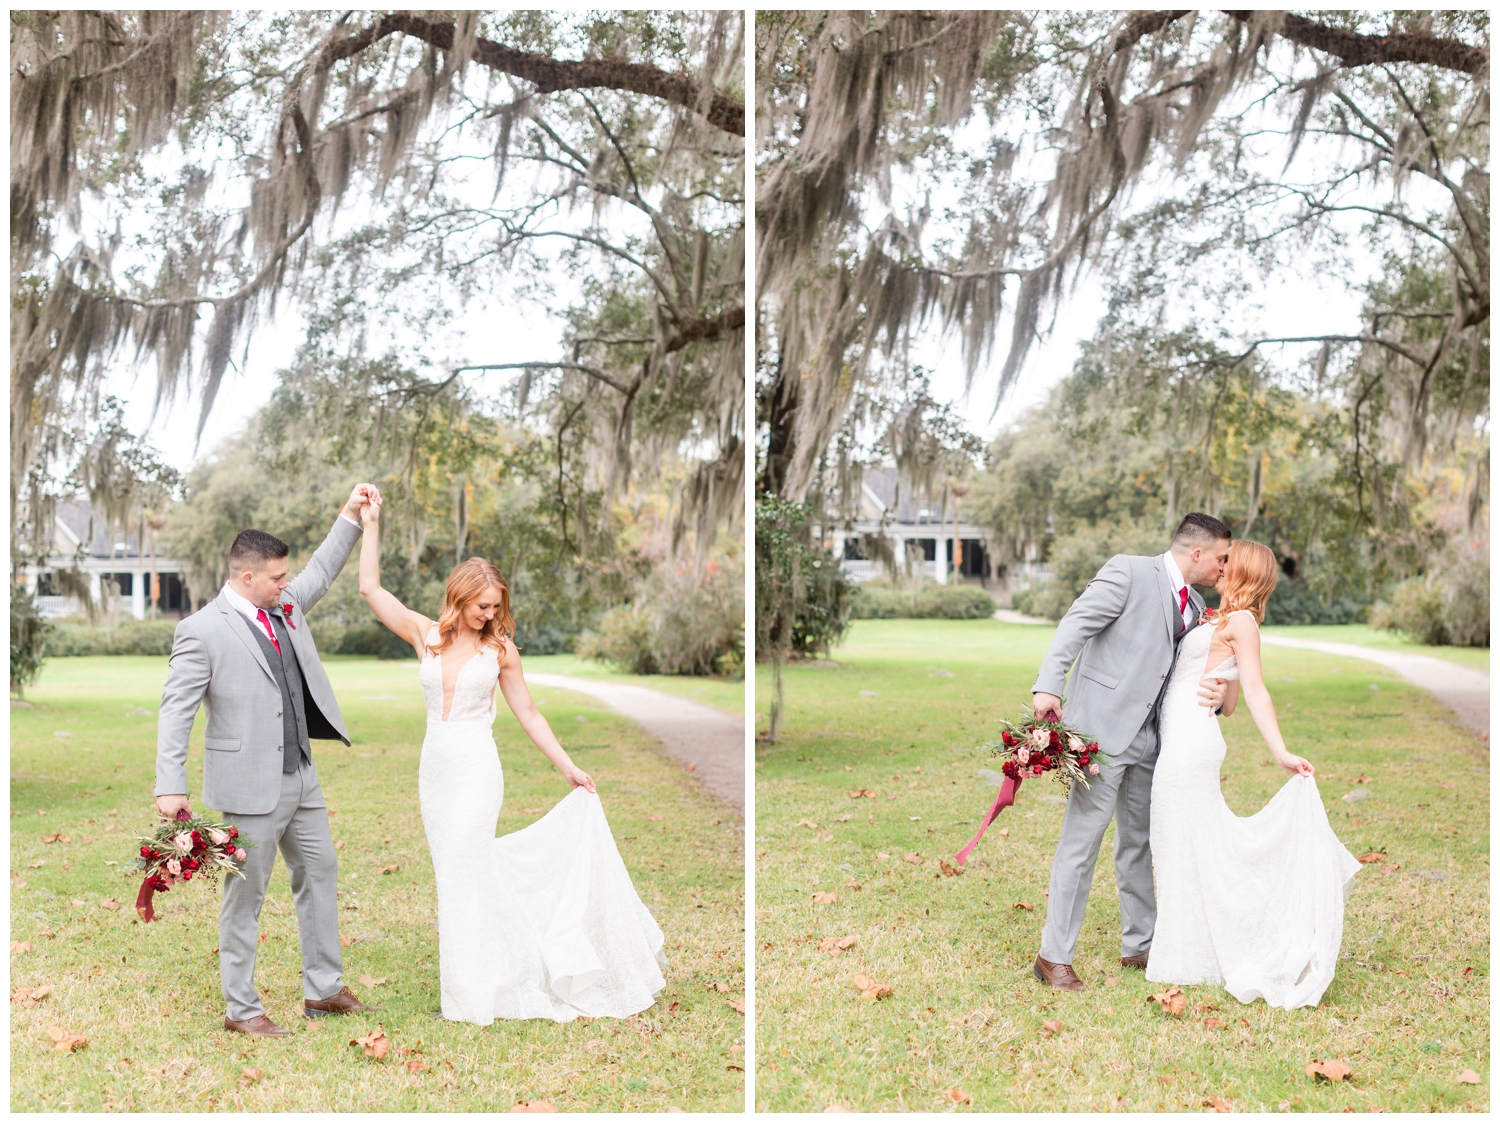 groom twirling bride on lawn at Magnolia Plantation and Gardens during intimate Charleston winter elopement